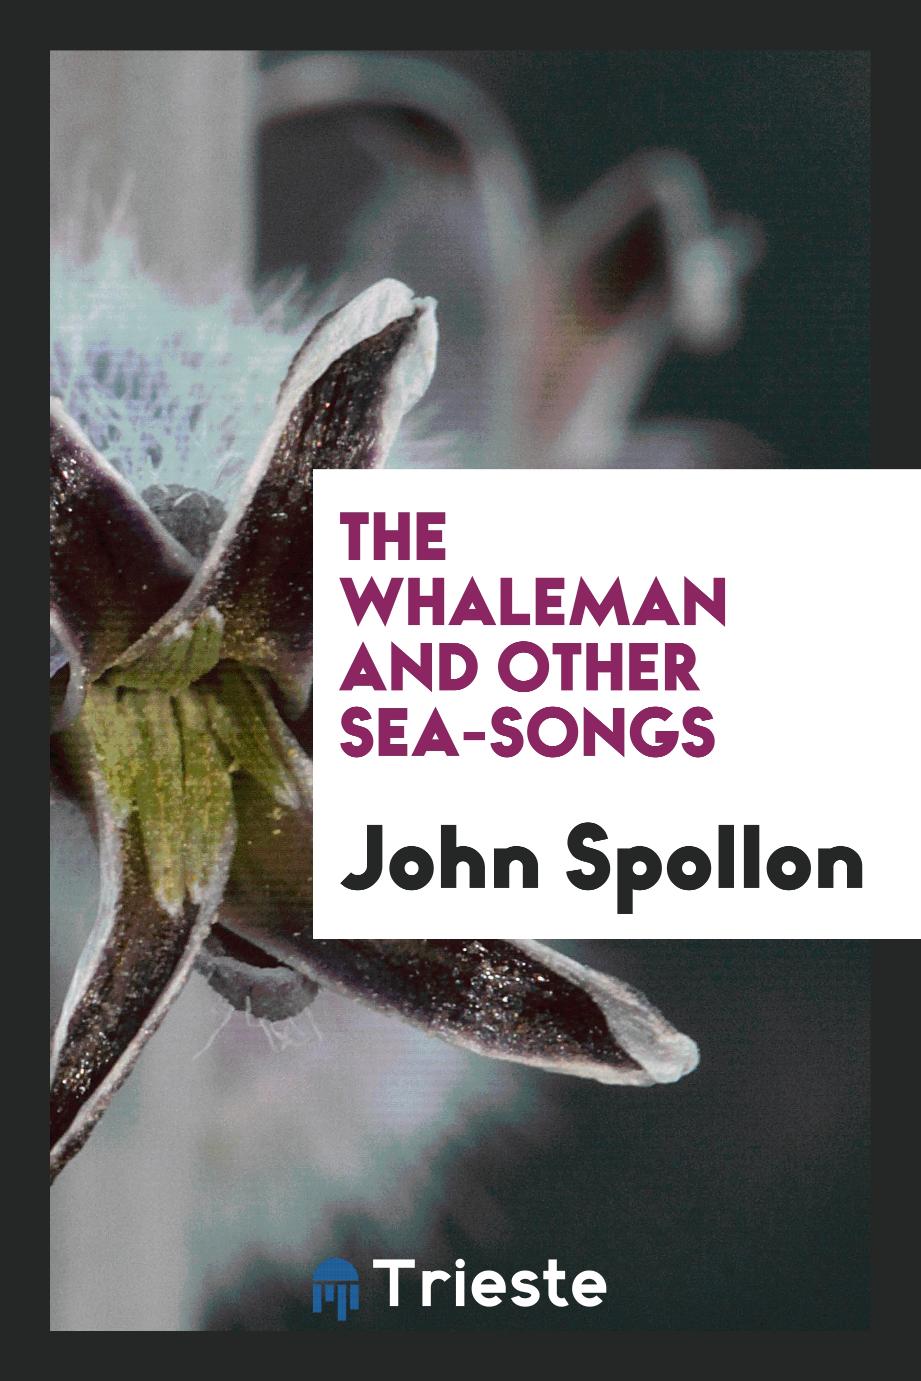 John Spollon - The Whaleman and Other Sea-songs